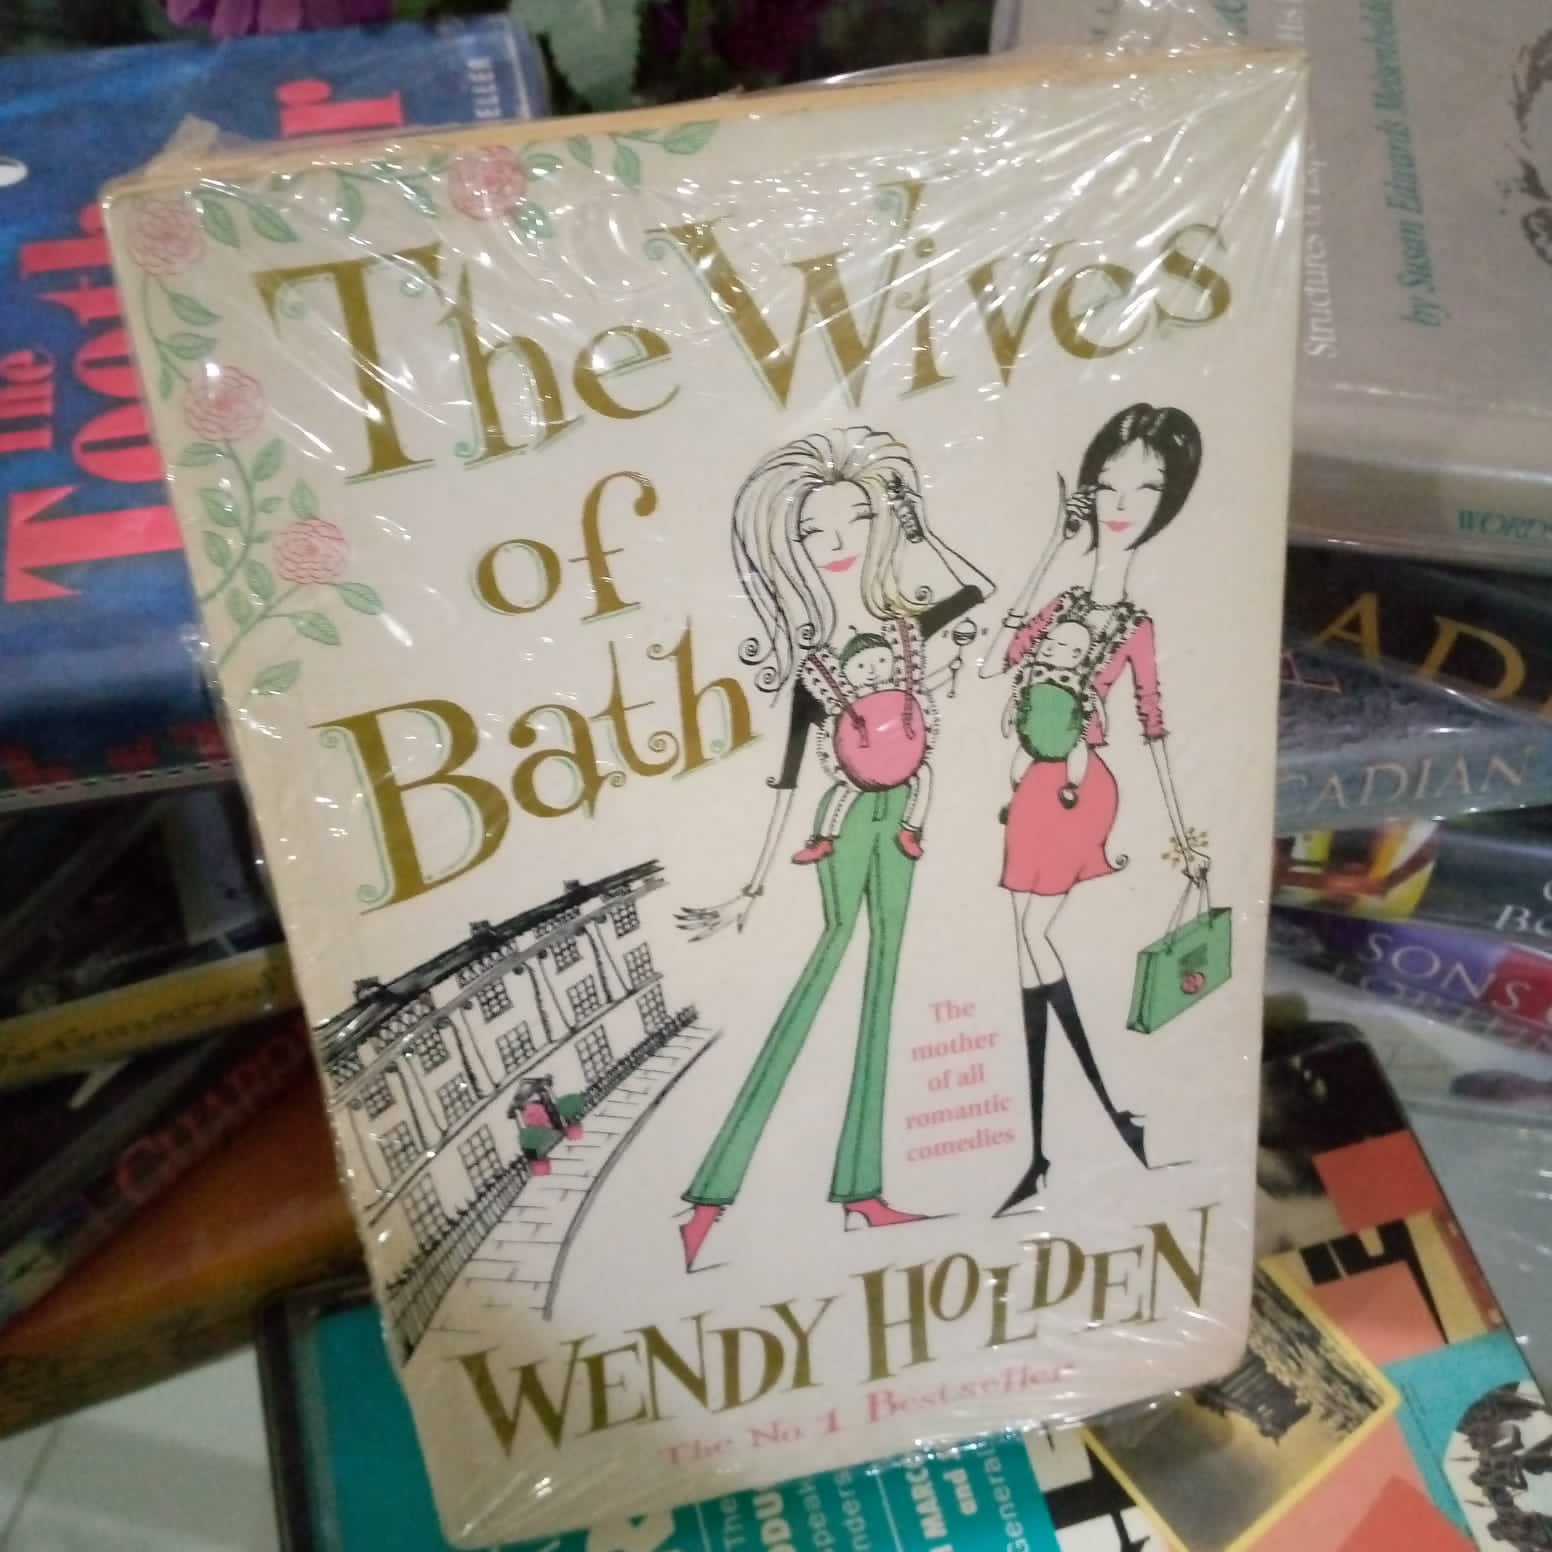 the wives of bath